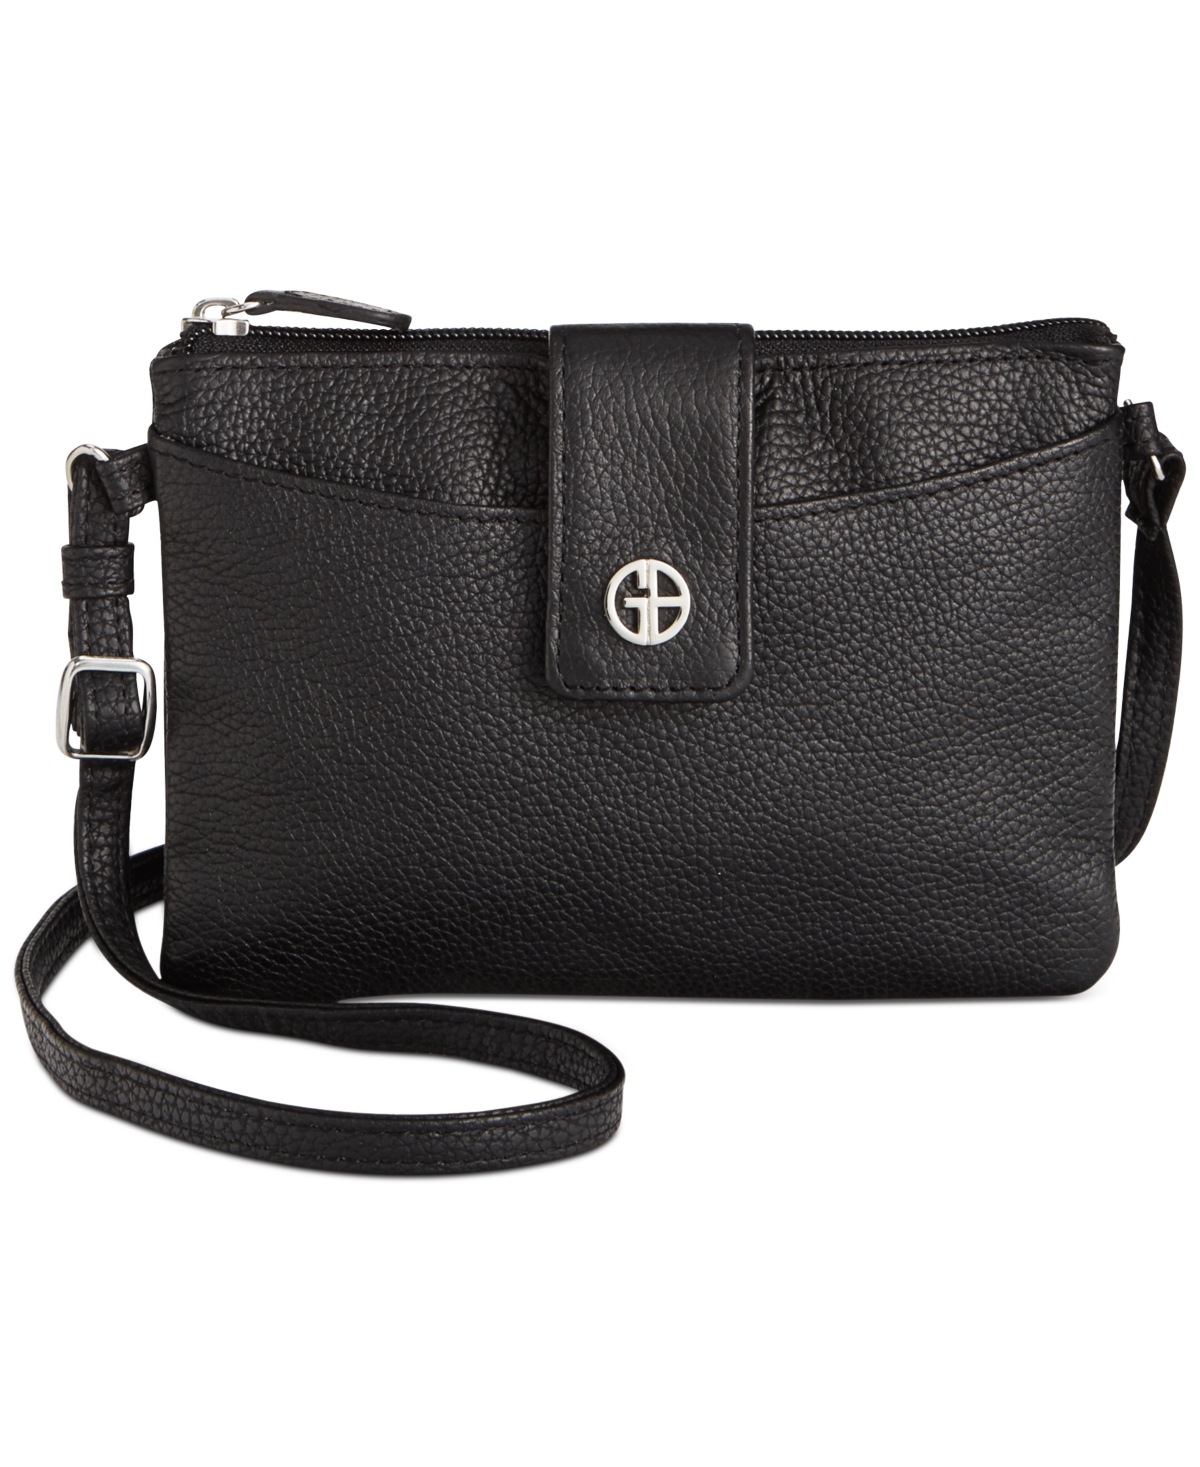 Leather Softy Mini Accordion Crossbody, Created for Macy's - Black/Silver